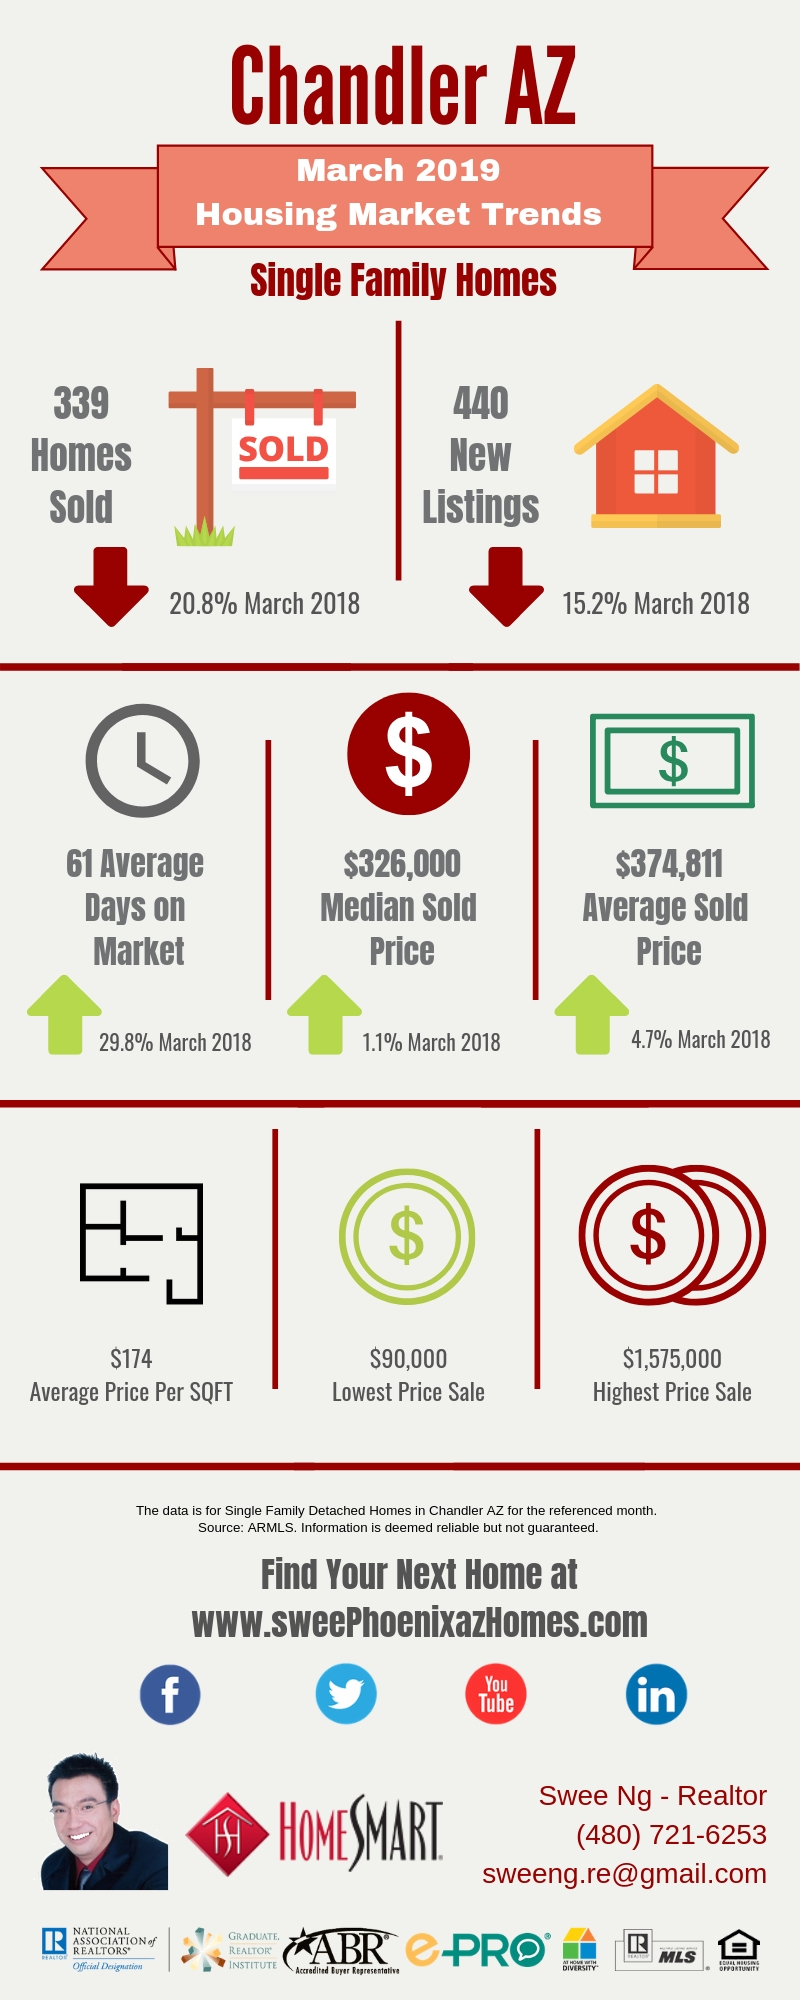 Chandler AZ Housing Market Update March 2019 by Swee Ng, House Value and Real Estate Listings